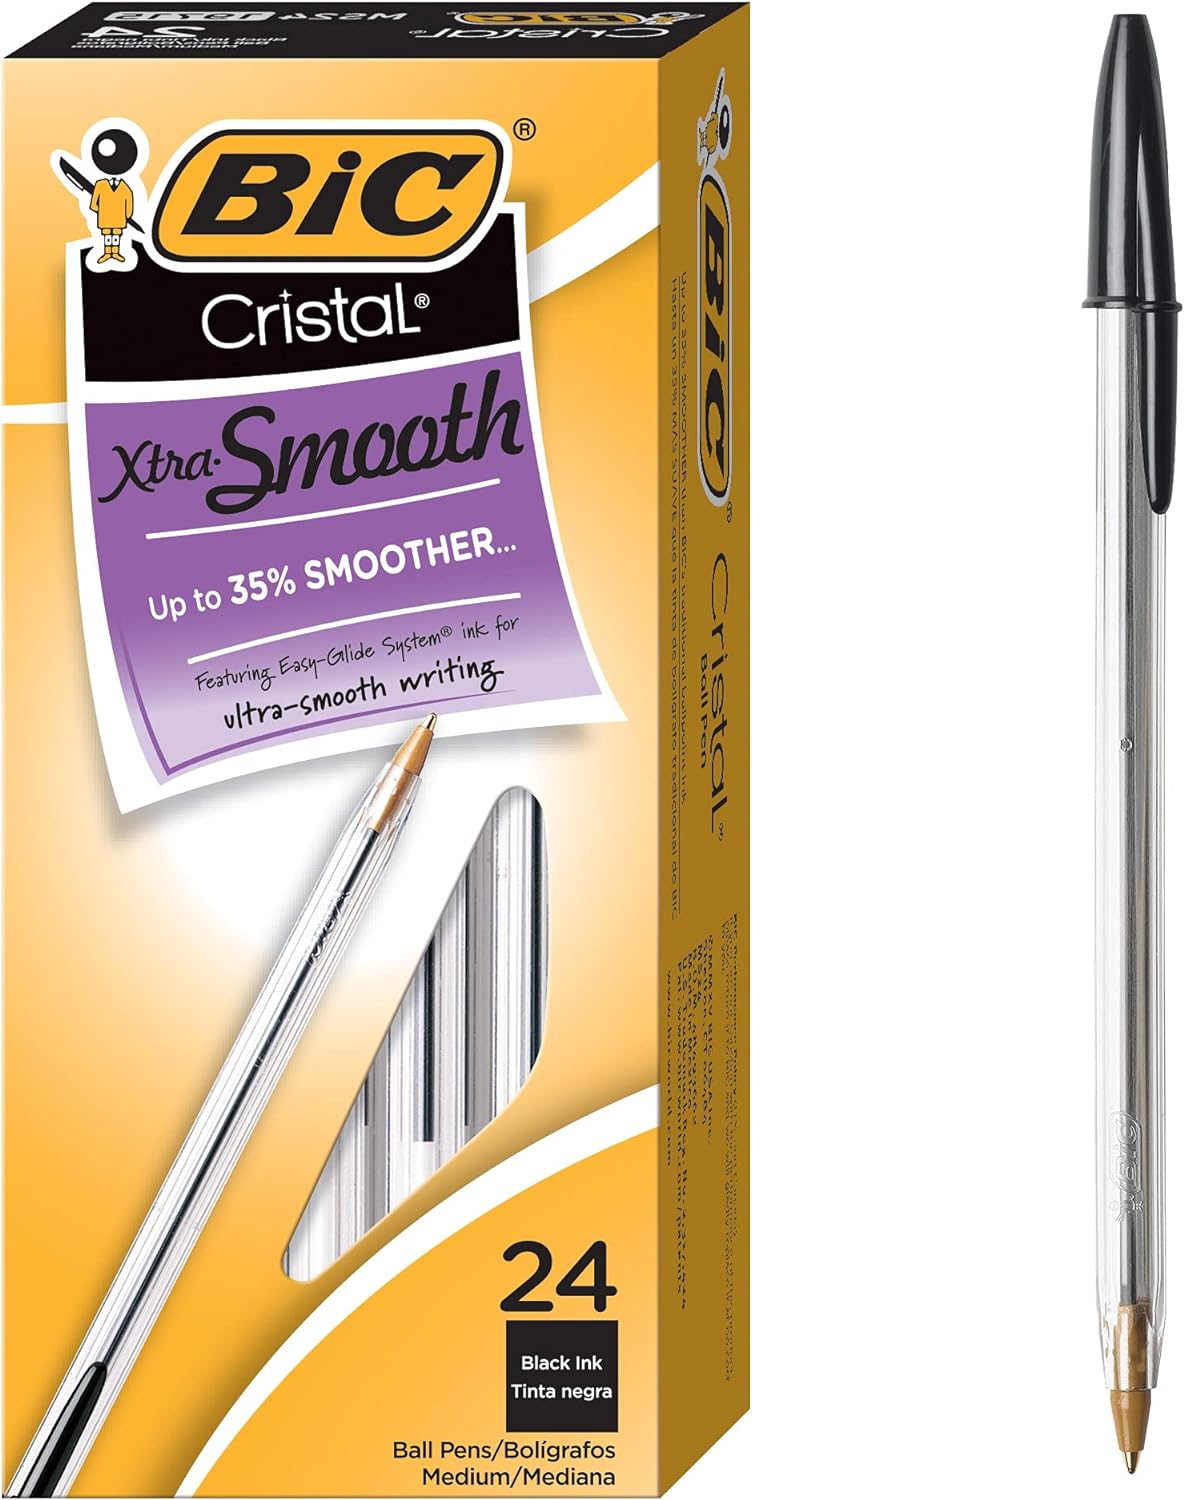 BIC Cristal Xtra Smooth Ballpoint Pen, Medium Point (1.0mm), Black, For Ultra-Smooth Writing, 24-Count